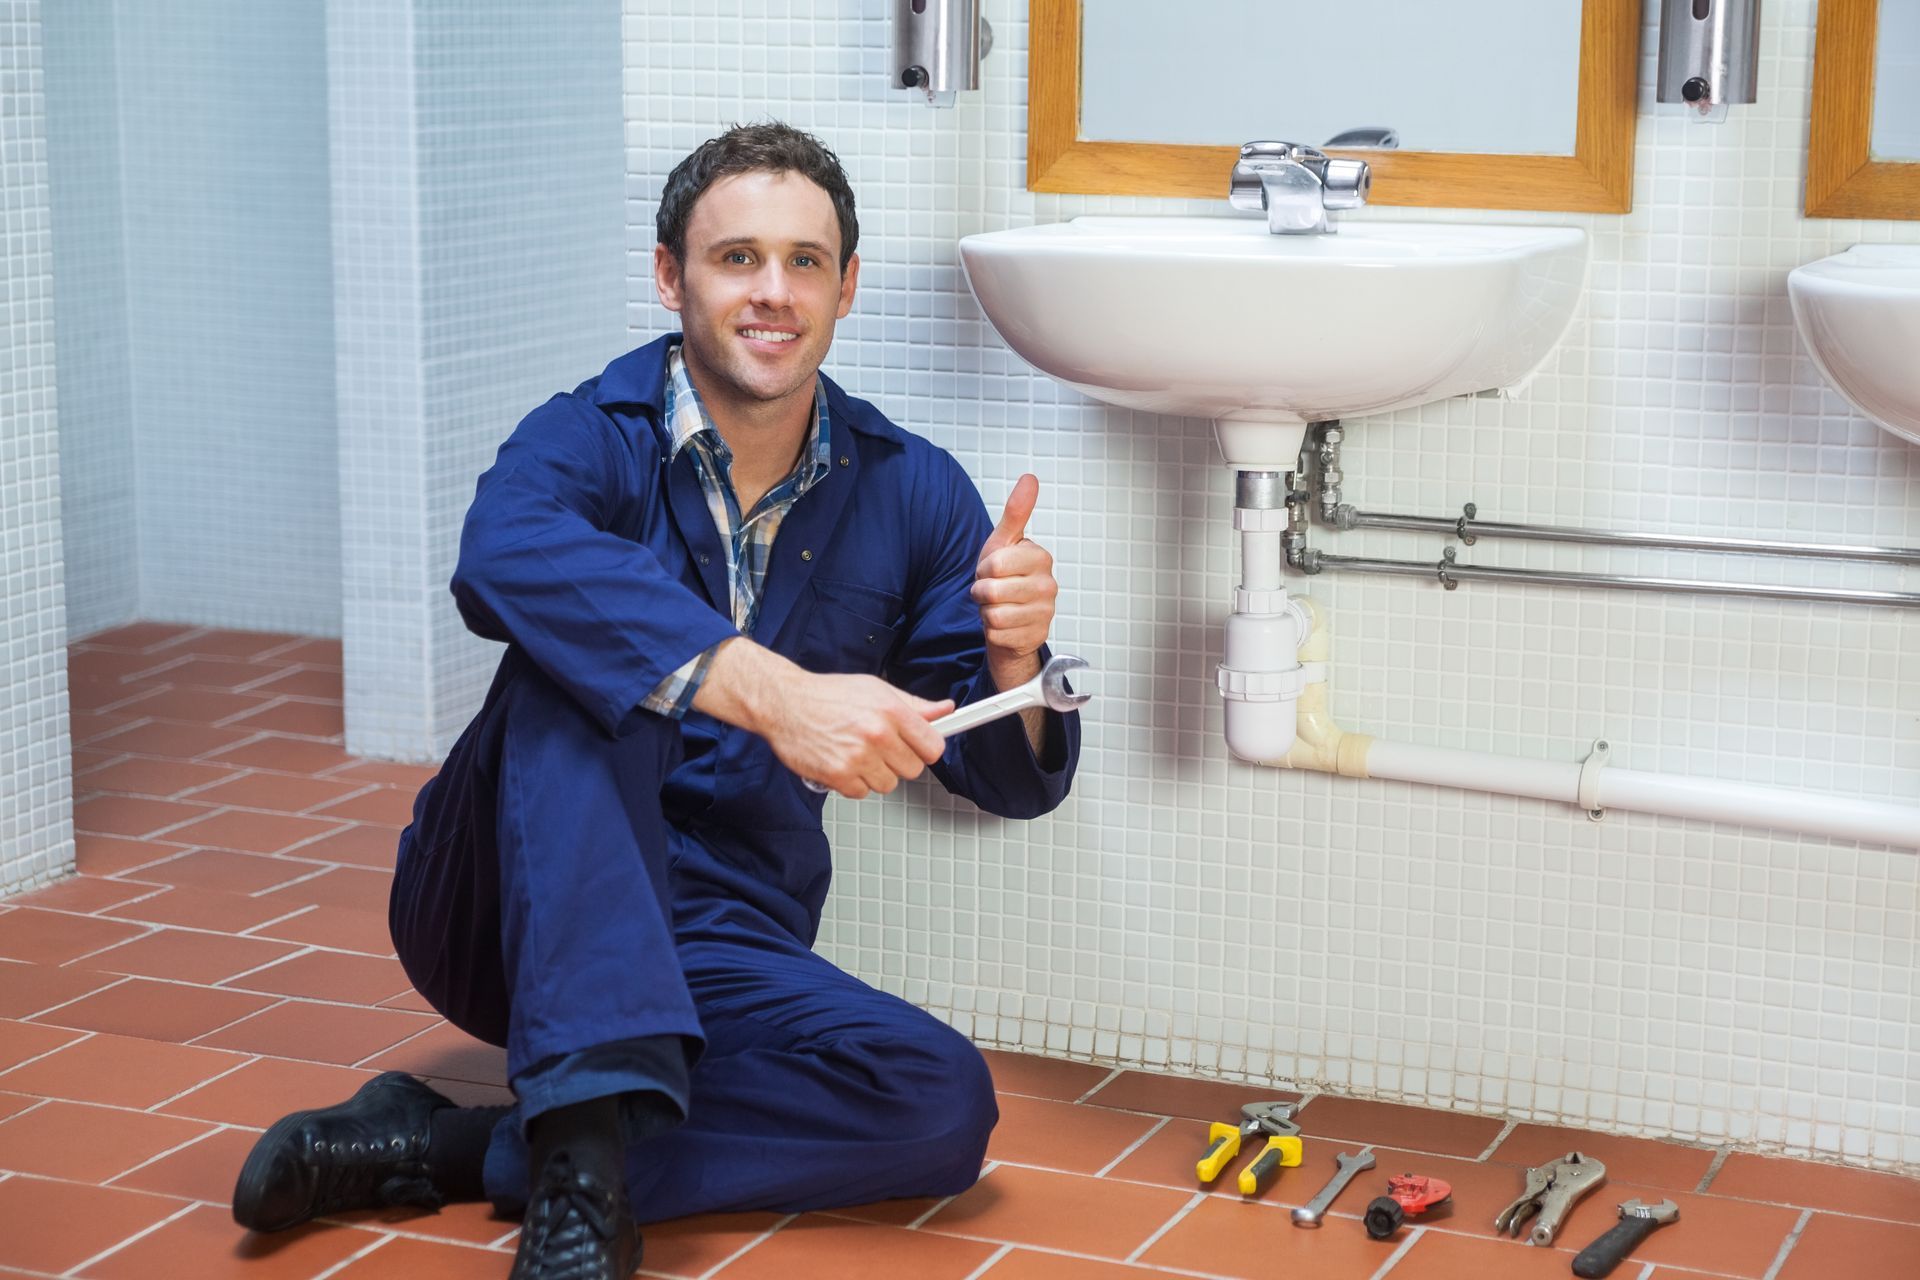 a plumber is kneeling on the floor in a bathroom holding a wrench and giving a thumbs up .